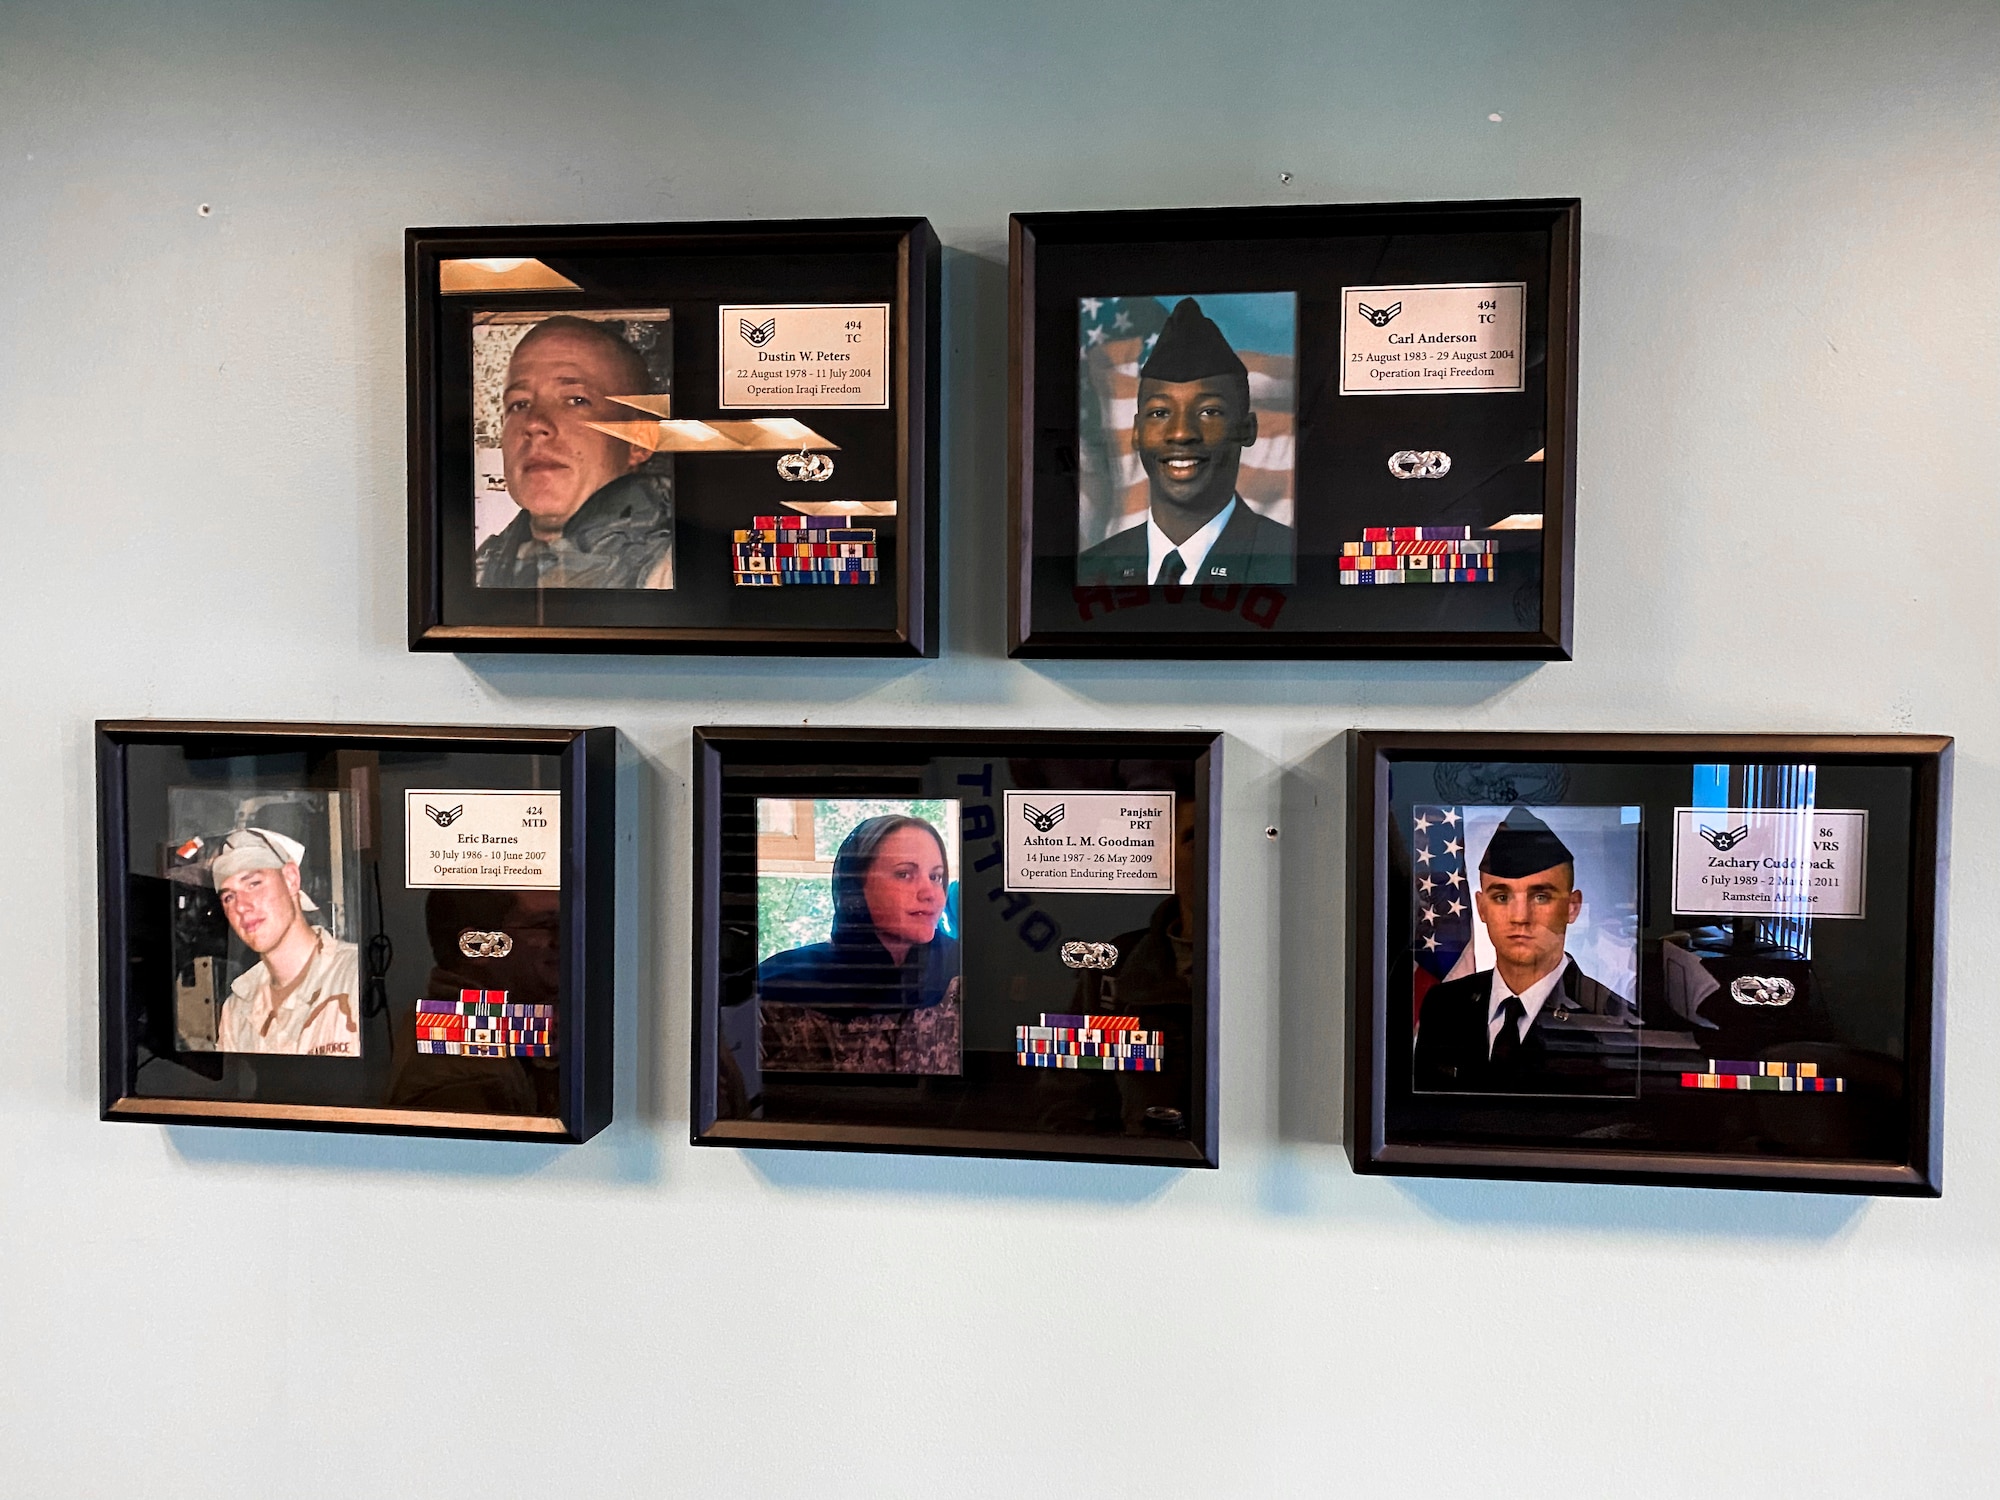 Shadow boxes hang on the wall as part of a 436th Logistics Readiness Squadron memorial, Jan. 17, 2020, at Dover Air Force Base, Del. The shadow boxes represent the fallen ground transportations operators killed in the line of duty. (U.S. Air Force photo by Senior Airman Christopher Quail)